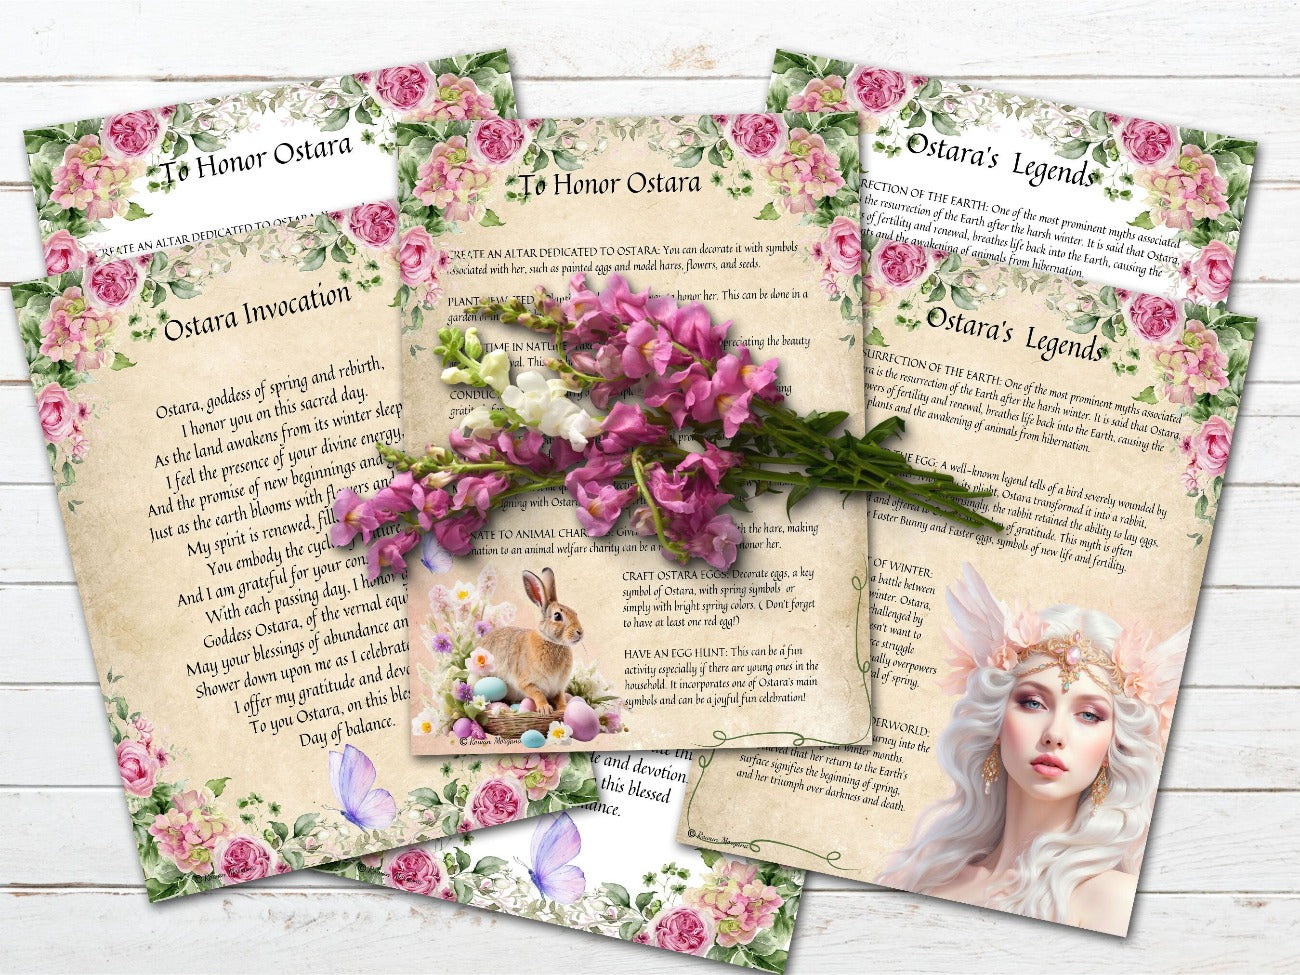 GODDESS OSTARA, Invocation, Legends and Honor Ostara pages shown with both the parchment and white backgrounds - Morgana Magick Spell